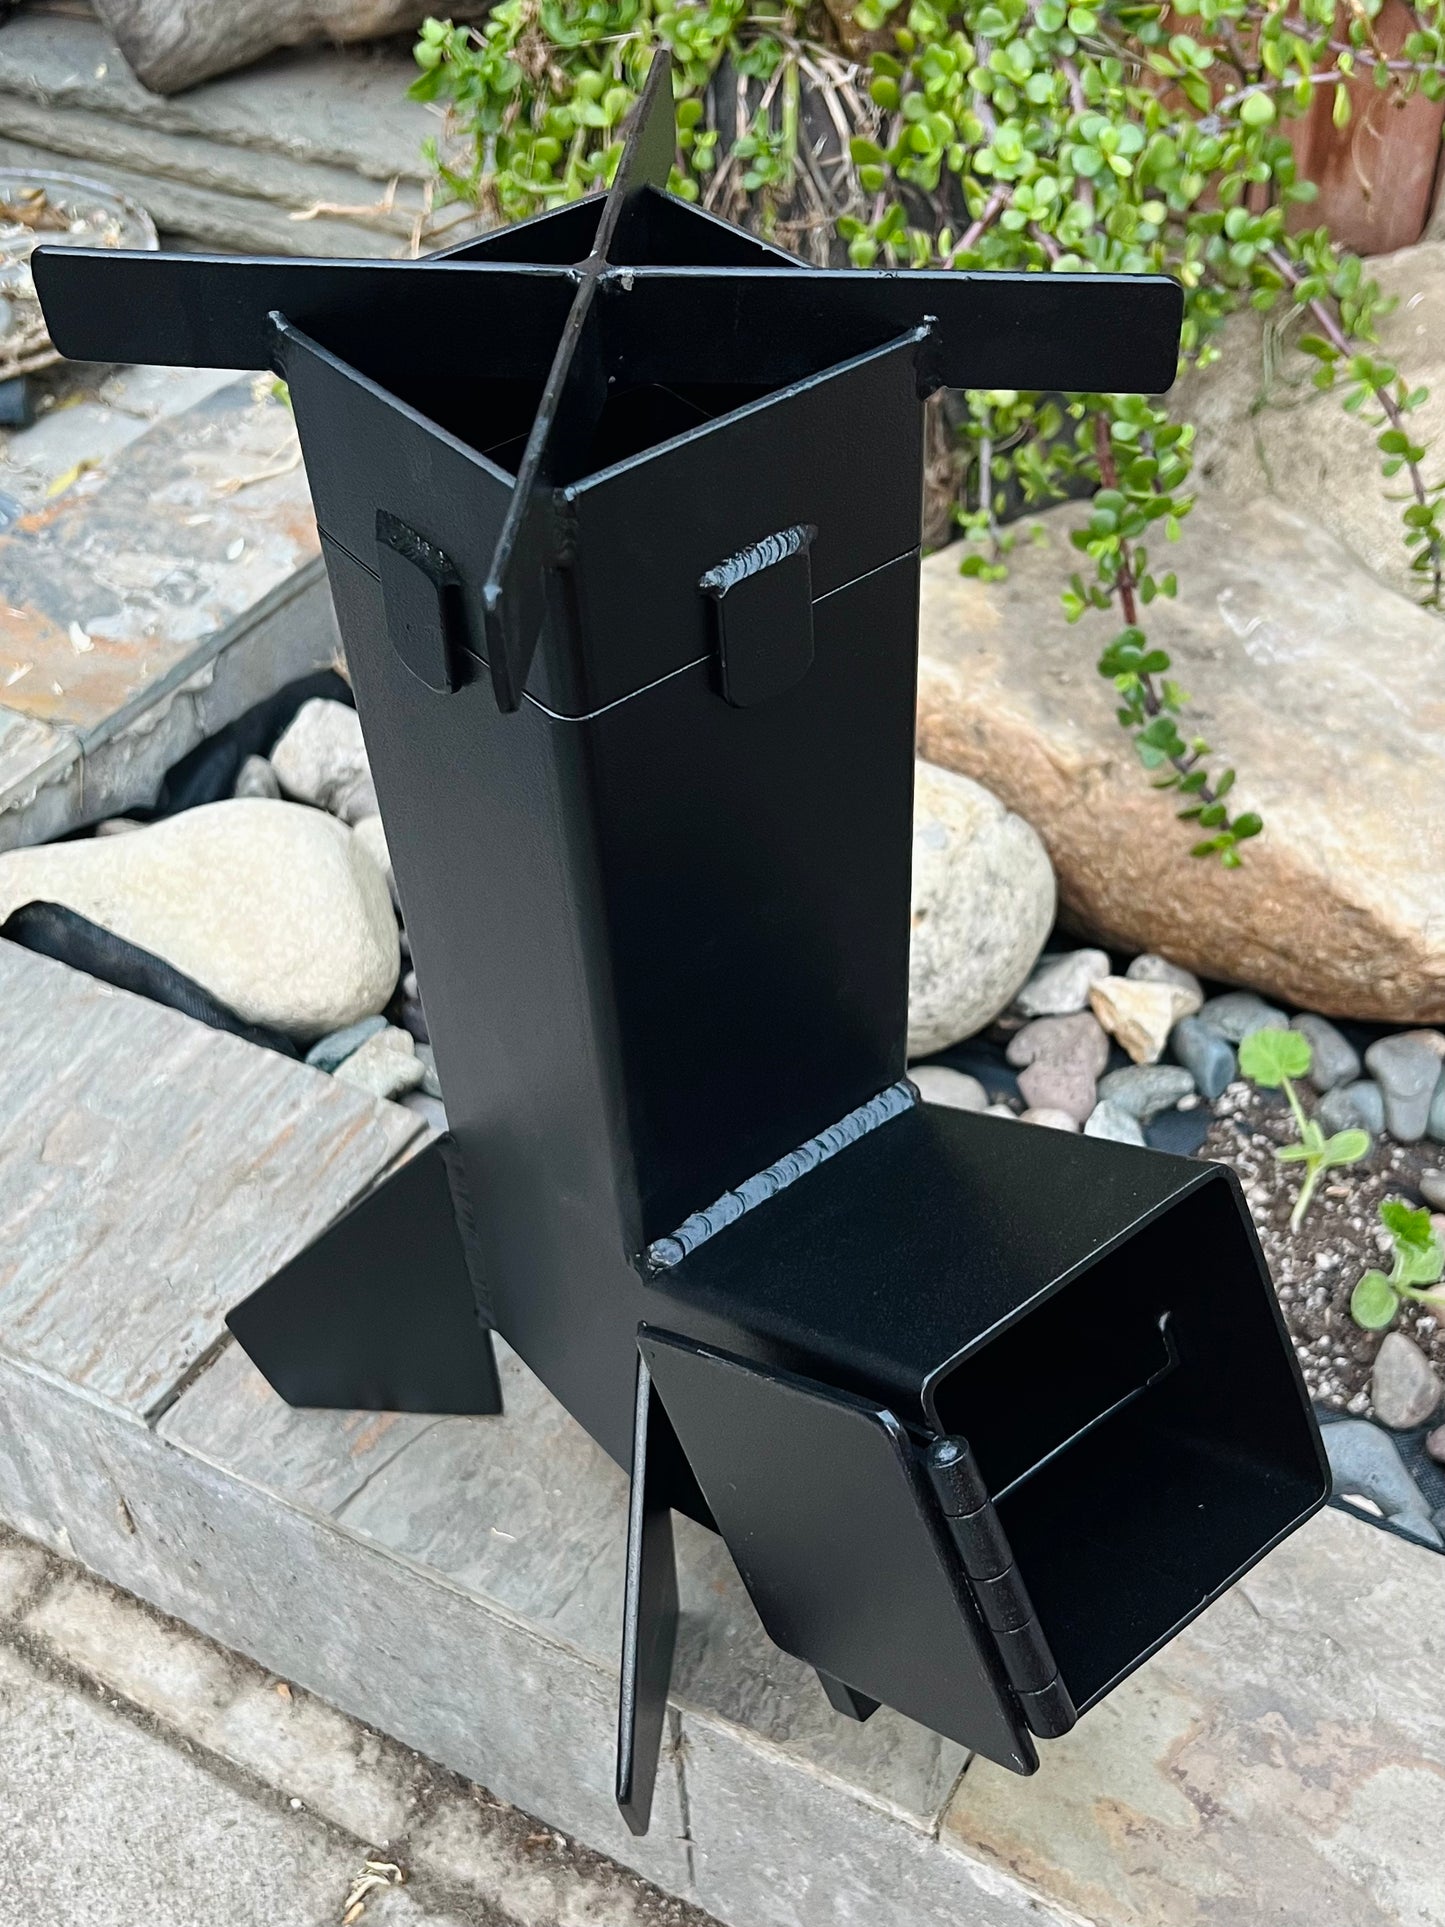 Rocket Stove 4" w/ Stainless Grill Attachment